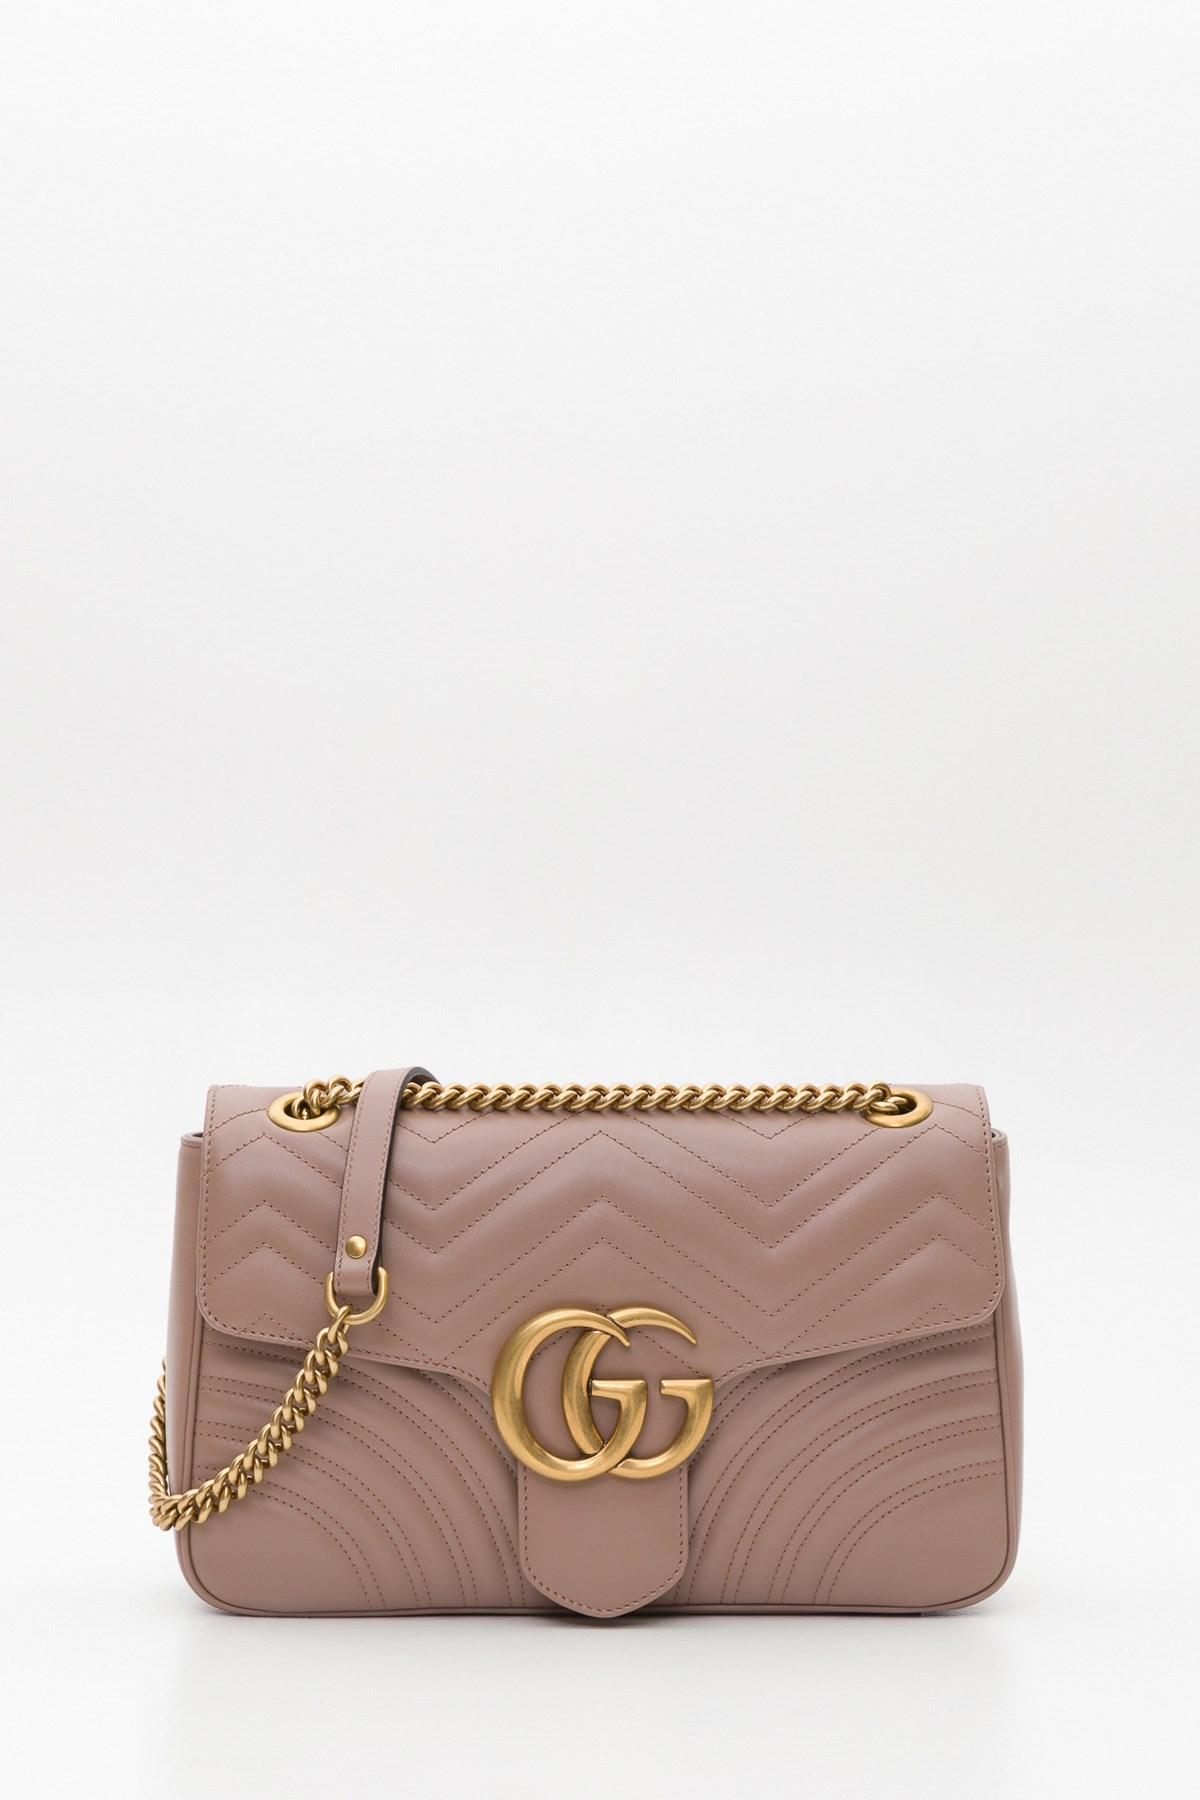 Gucci GG Marmont 2.0 Medium Shoulder Bag In Lion Trap. Ang Chev. Cuore 31 X  19 X 7 Cm in Natural | Lyst